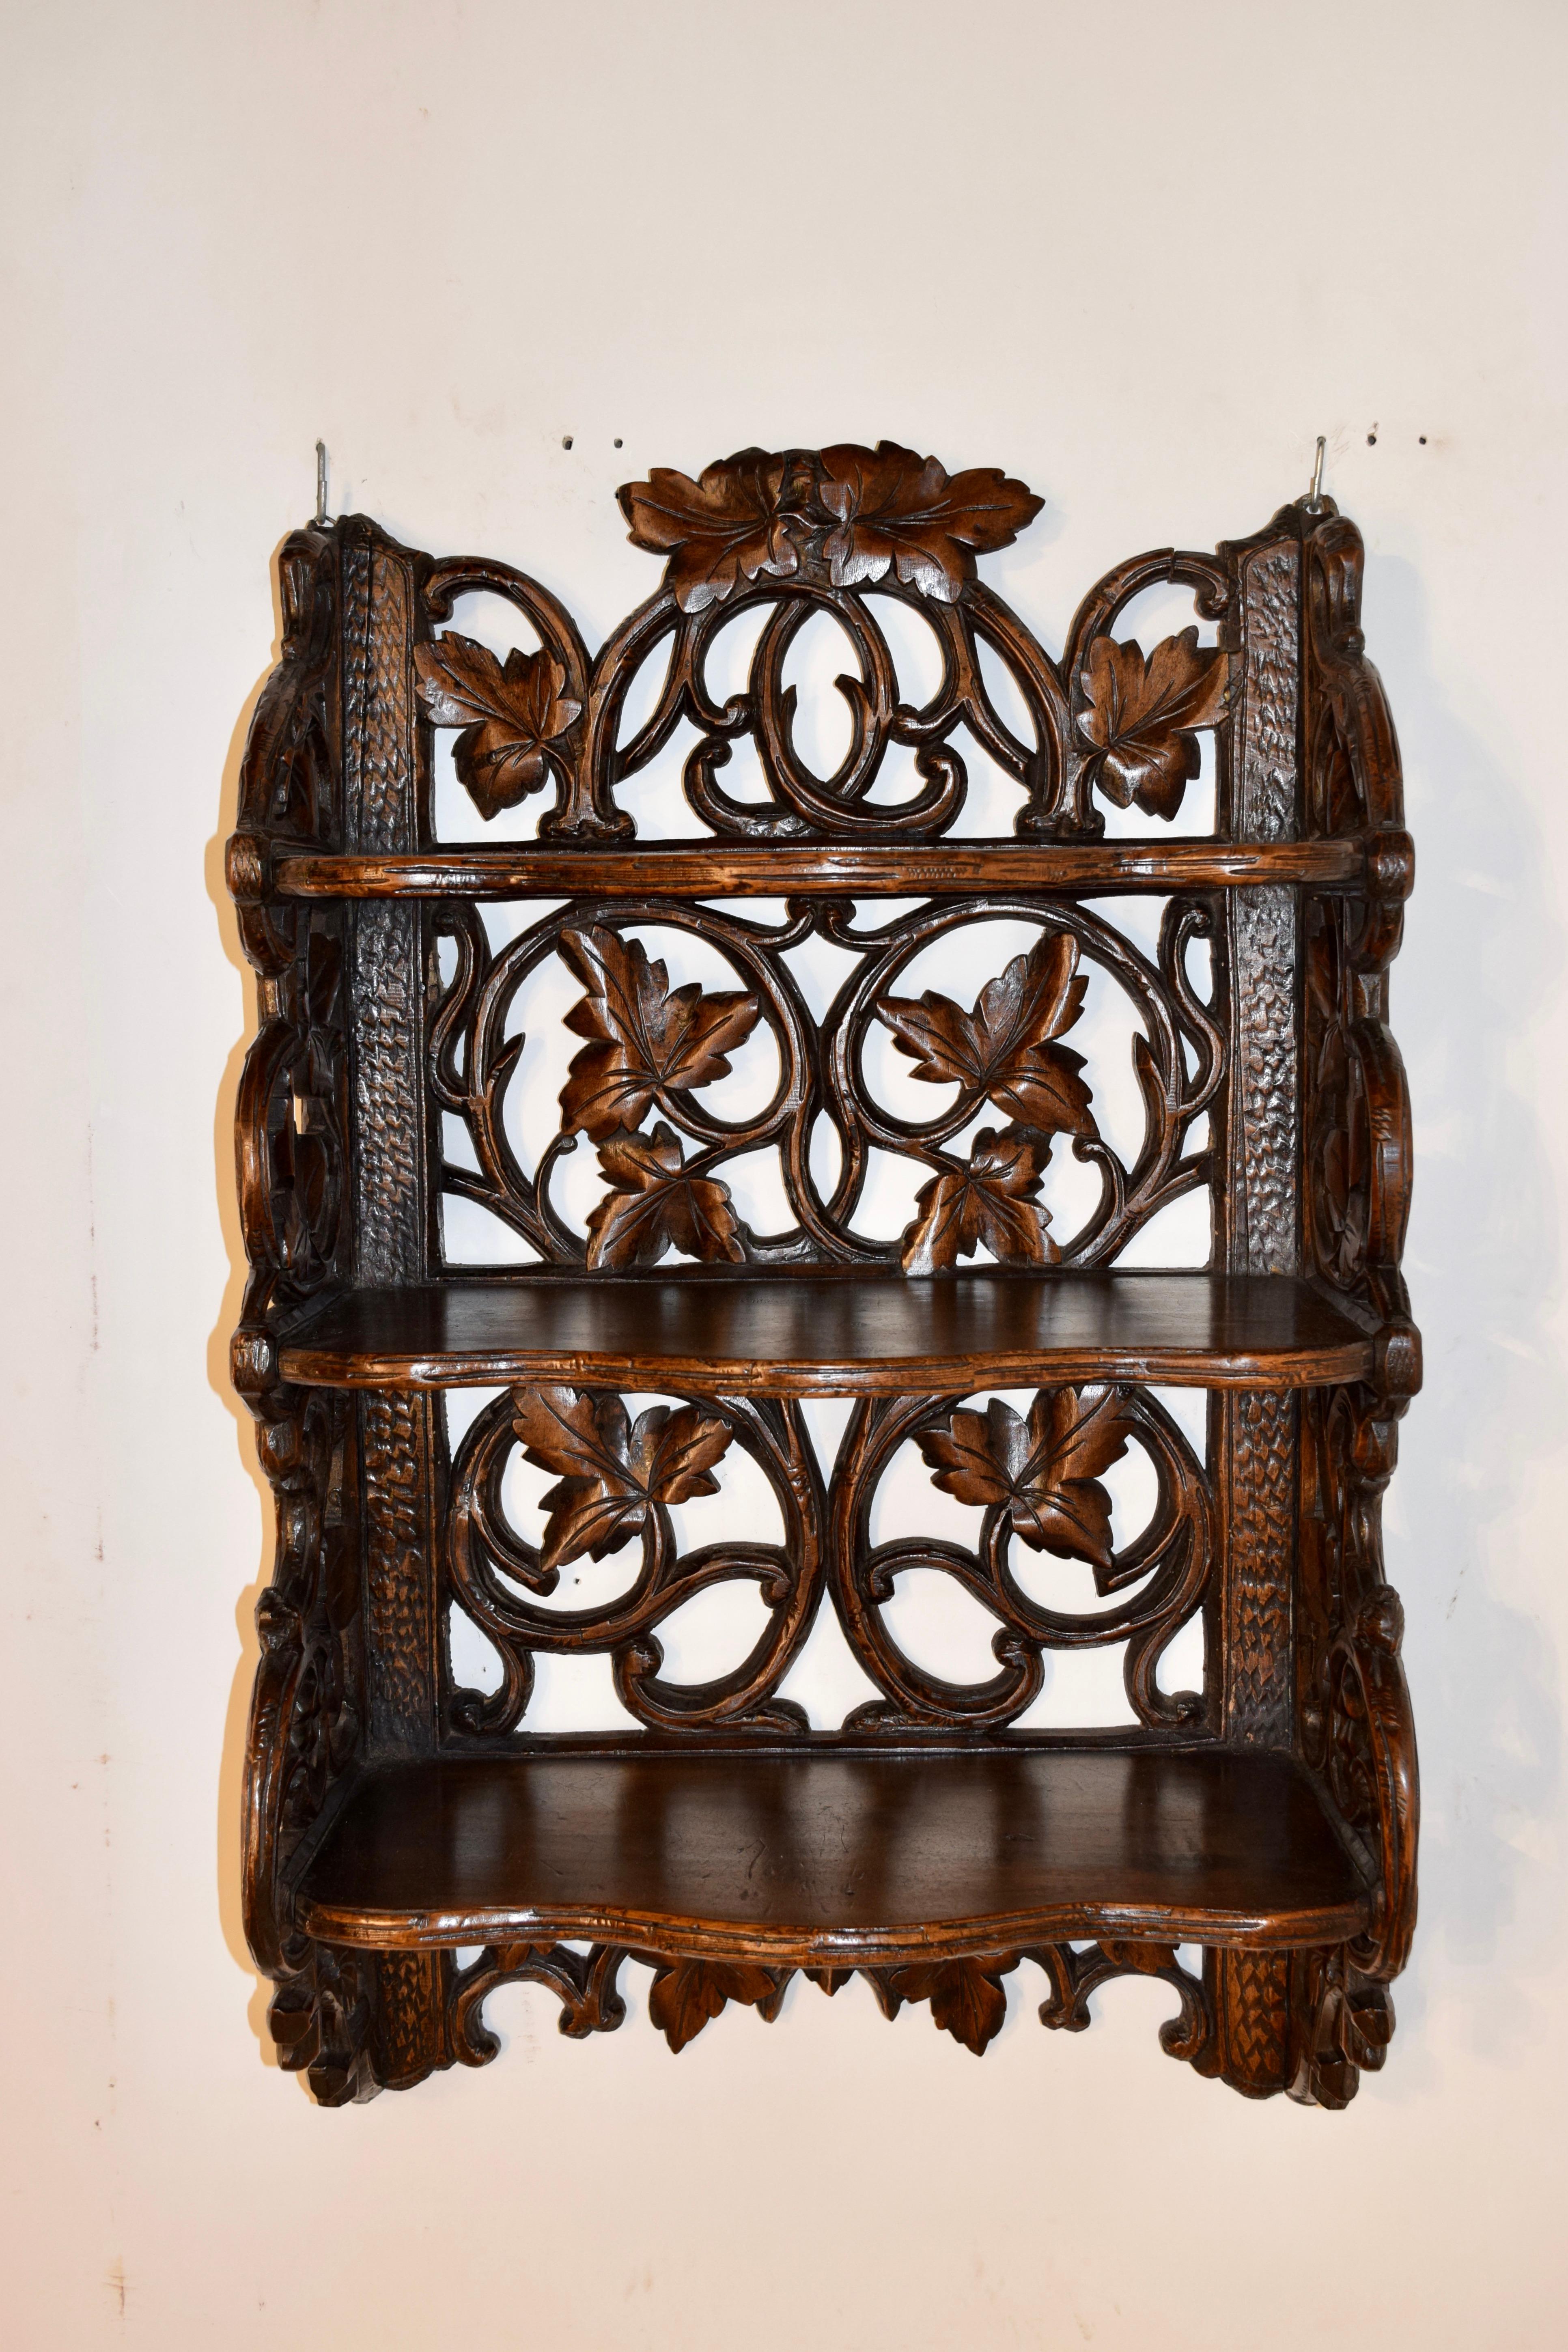 Hand-Carved 19th Century Black Forest Carved Wall Shelf